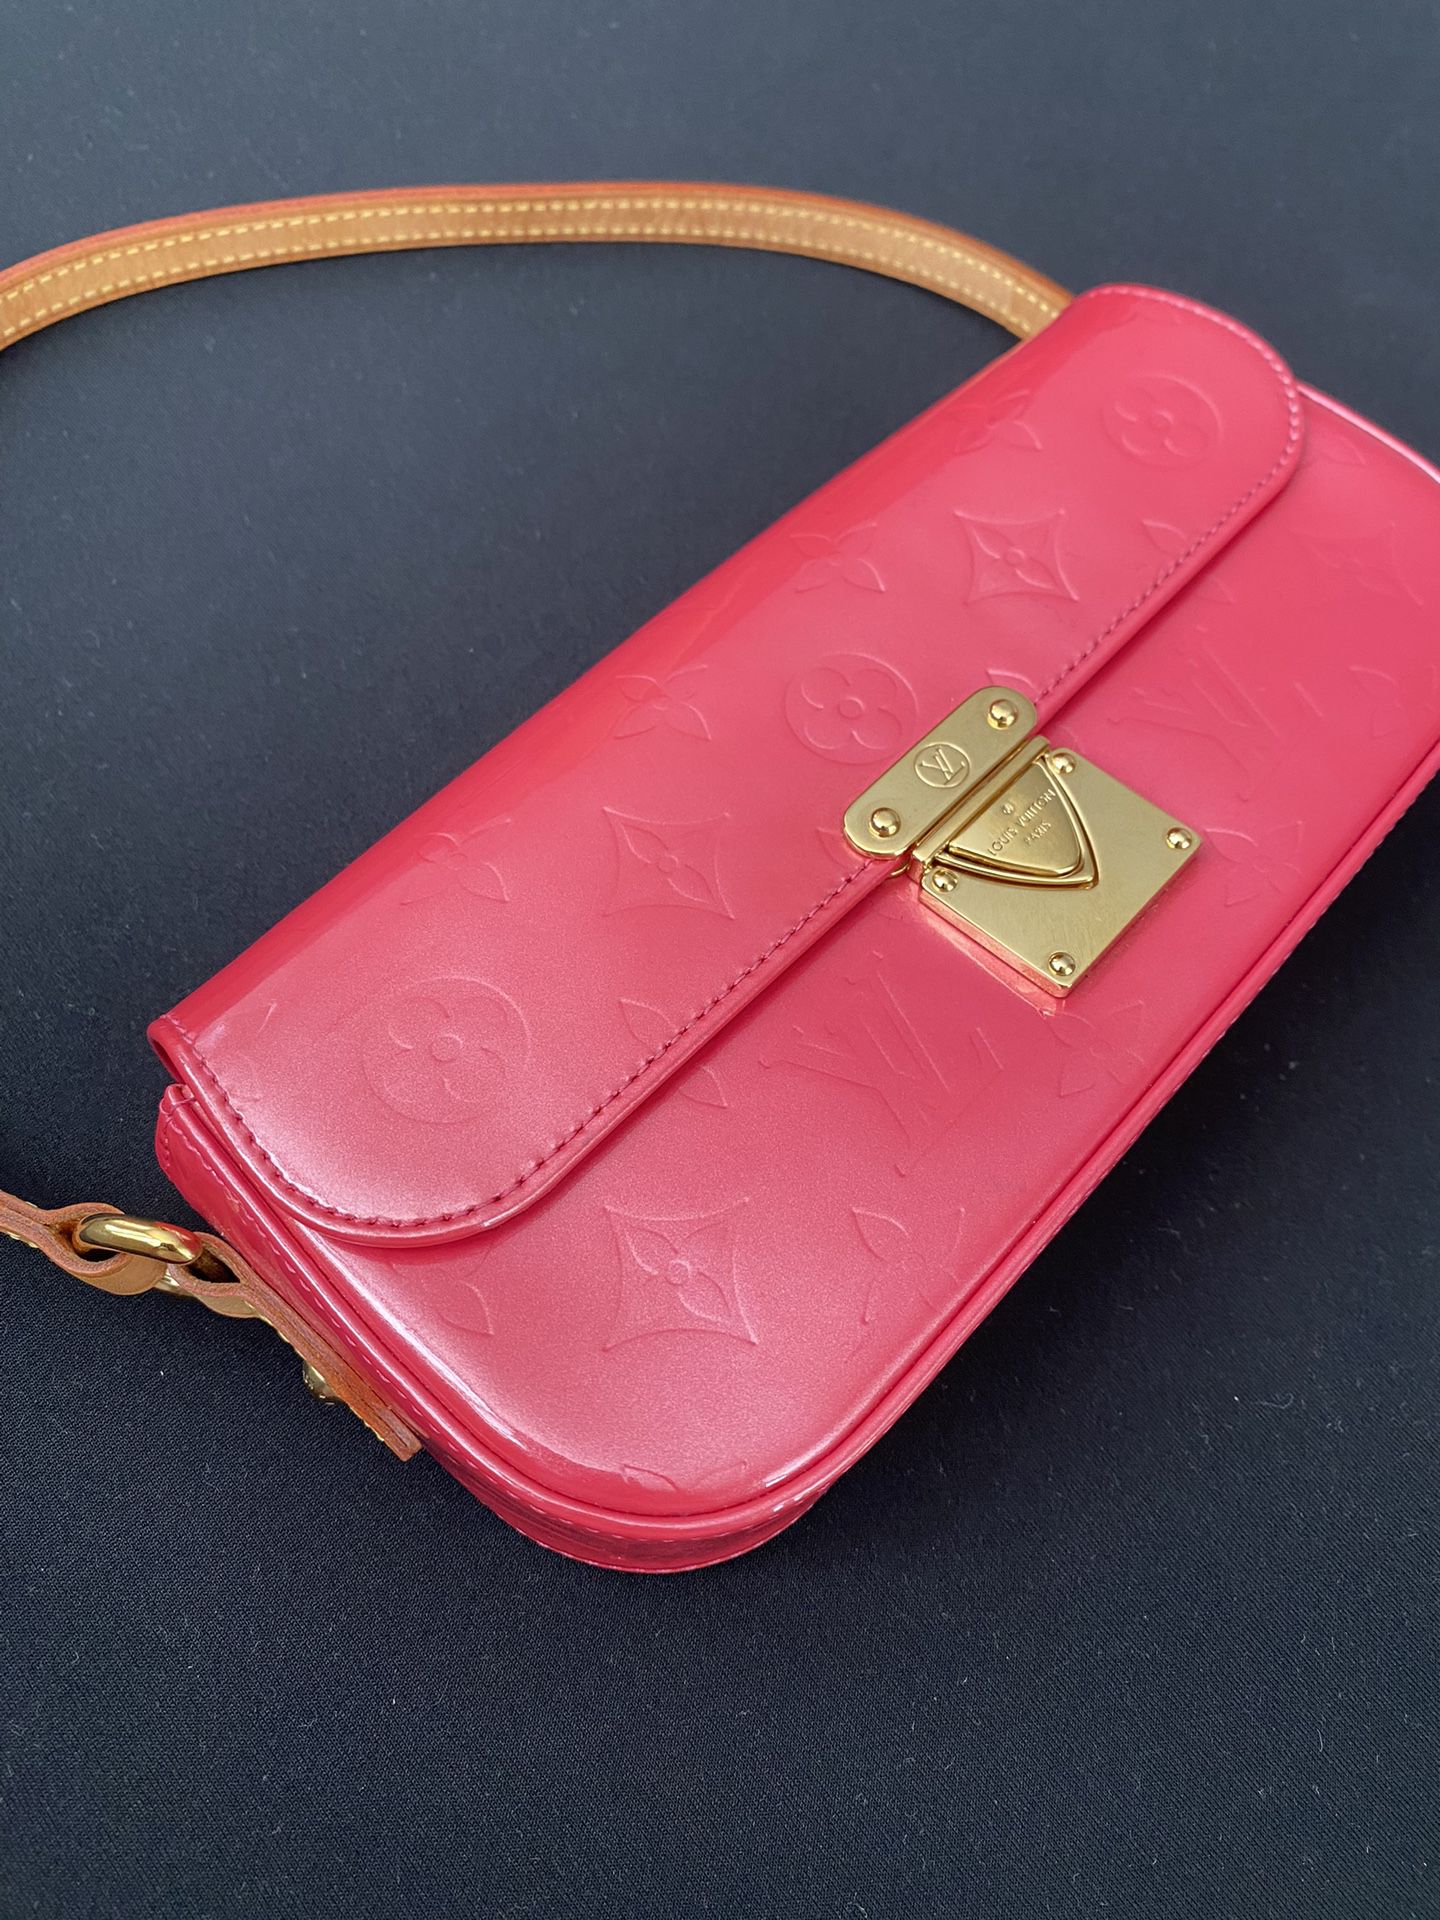 Louis Vuitton Vernis Reade PM for Sale in Hicksville, NY - OfferUp